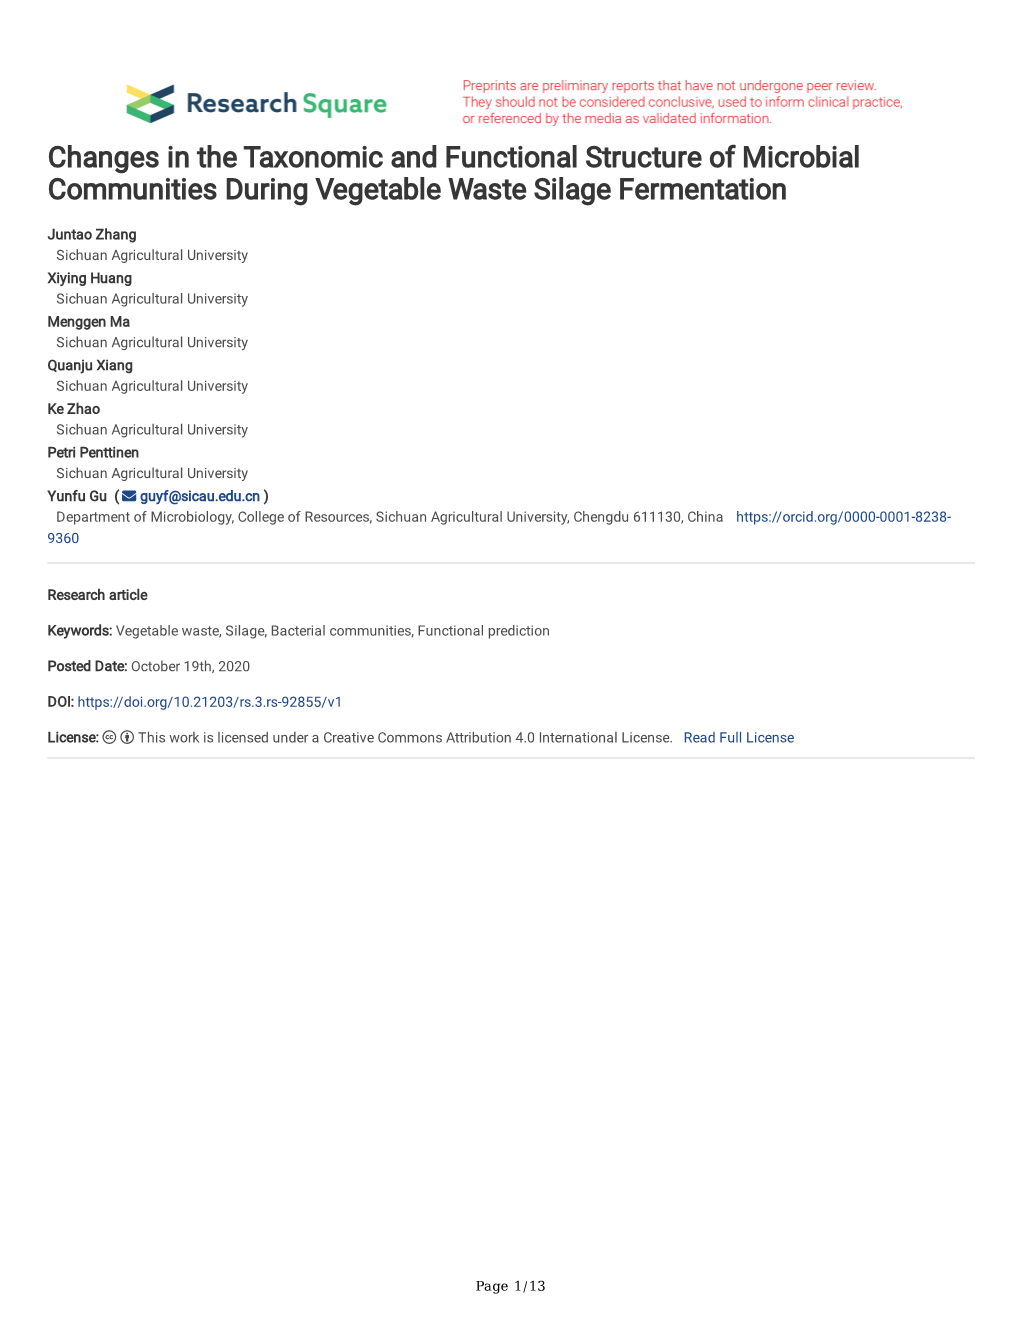 Changes in the Taxonomic and Functional Structure of Microbial Communities During Vegetable Waste Silage Fermentation